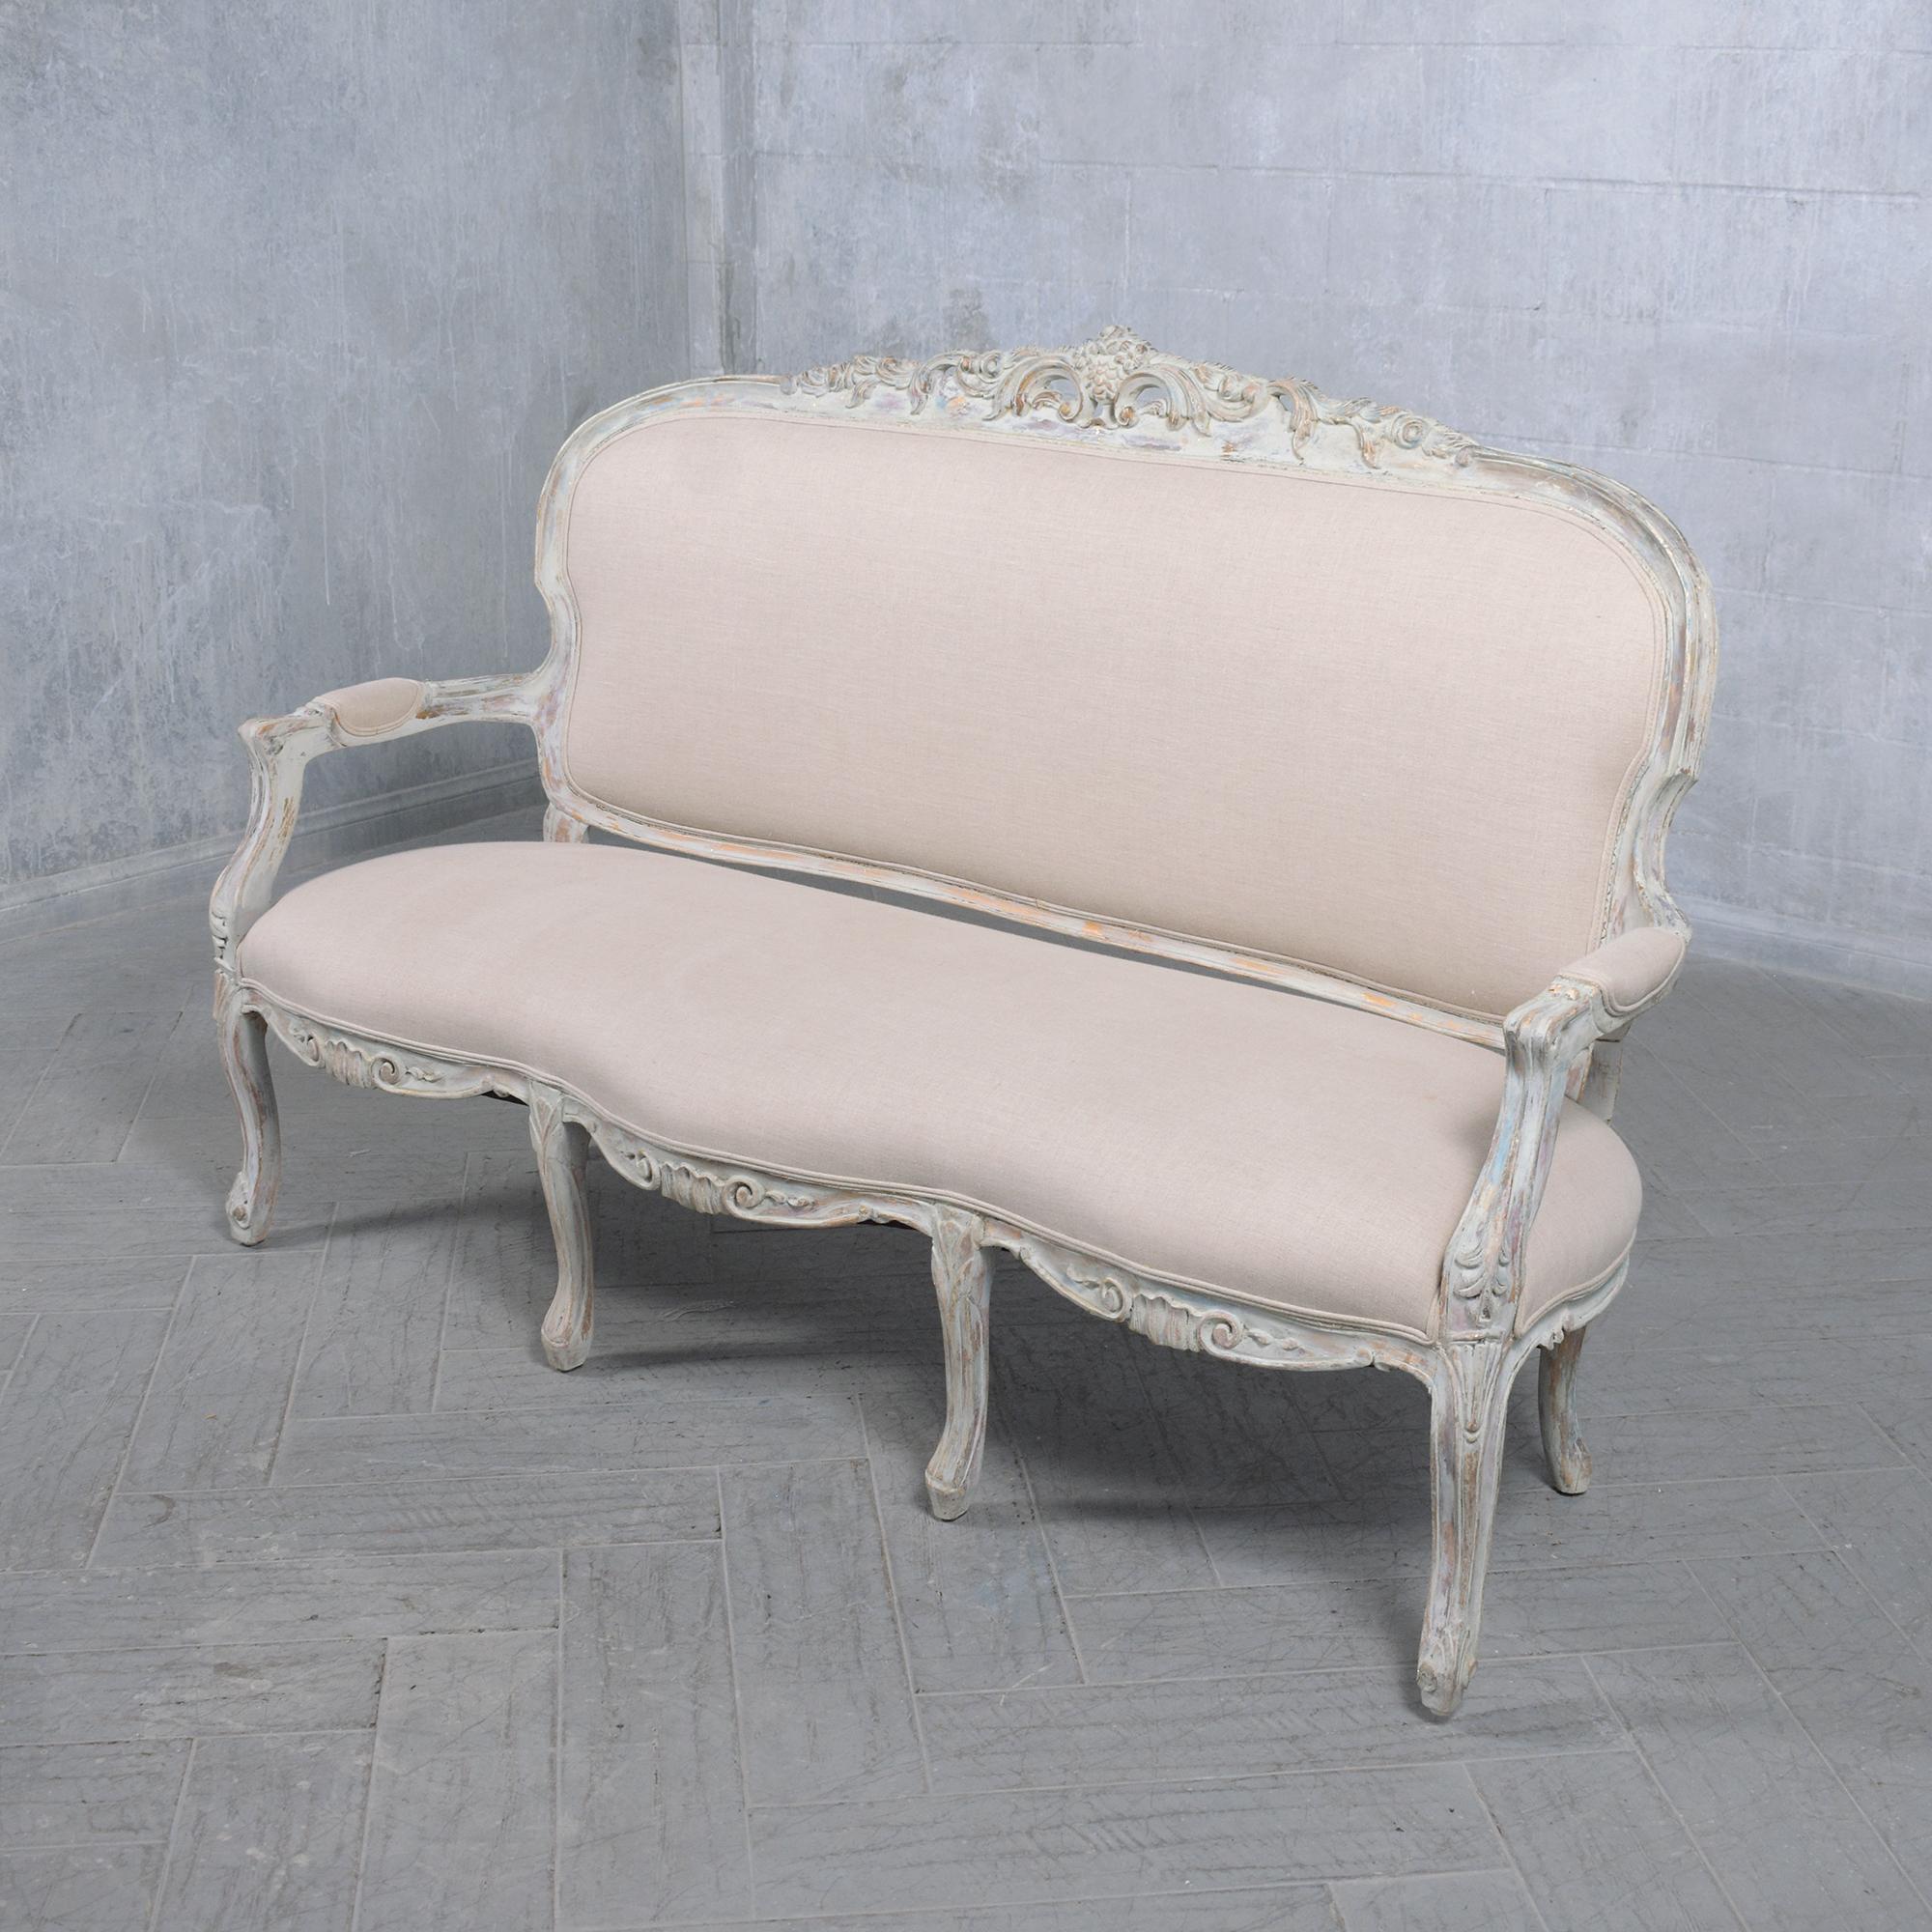 Early 20th Century Early 1900s French Sofa: Timeless Elegance in Hand-Carved Wood For Sale